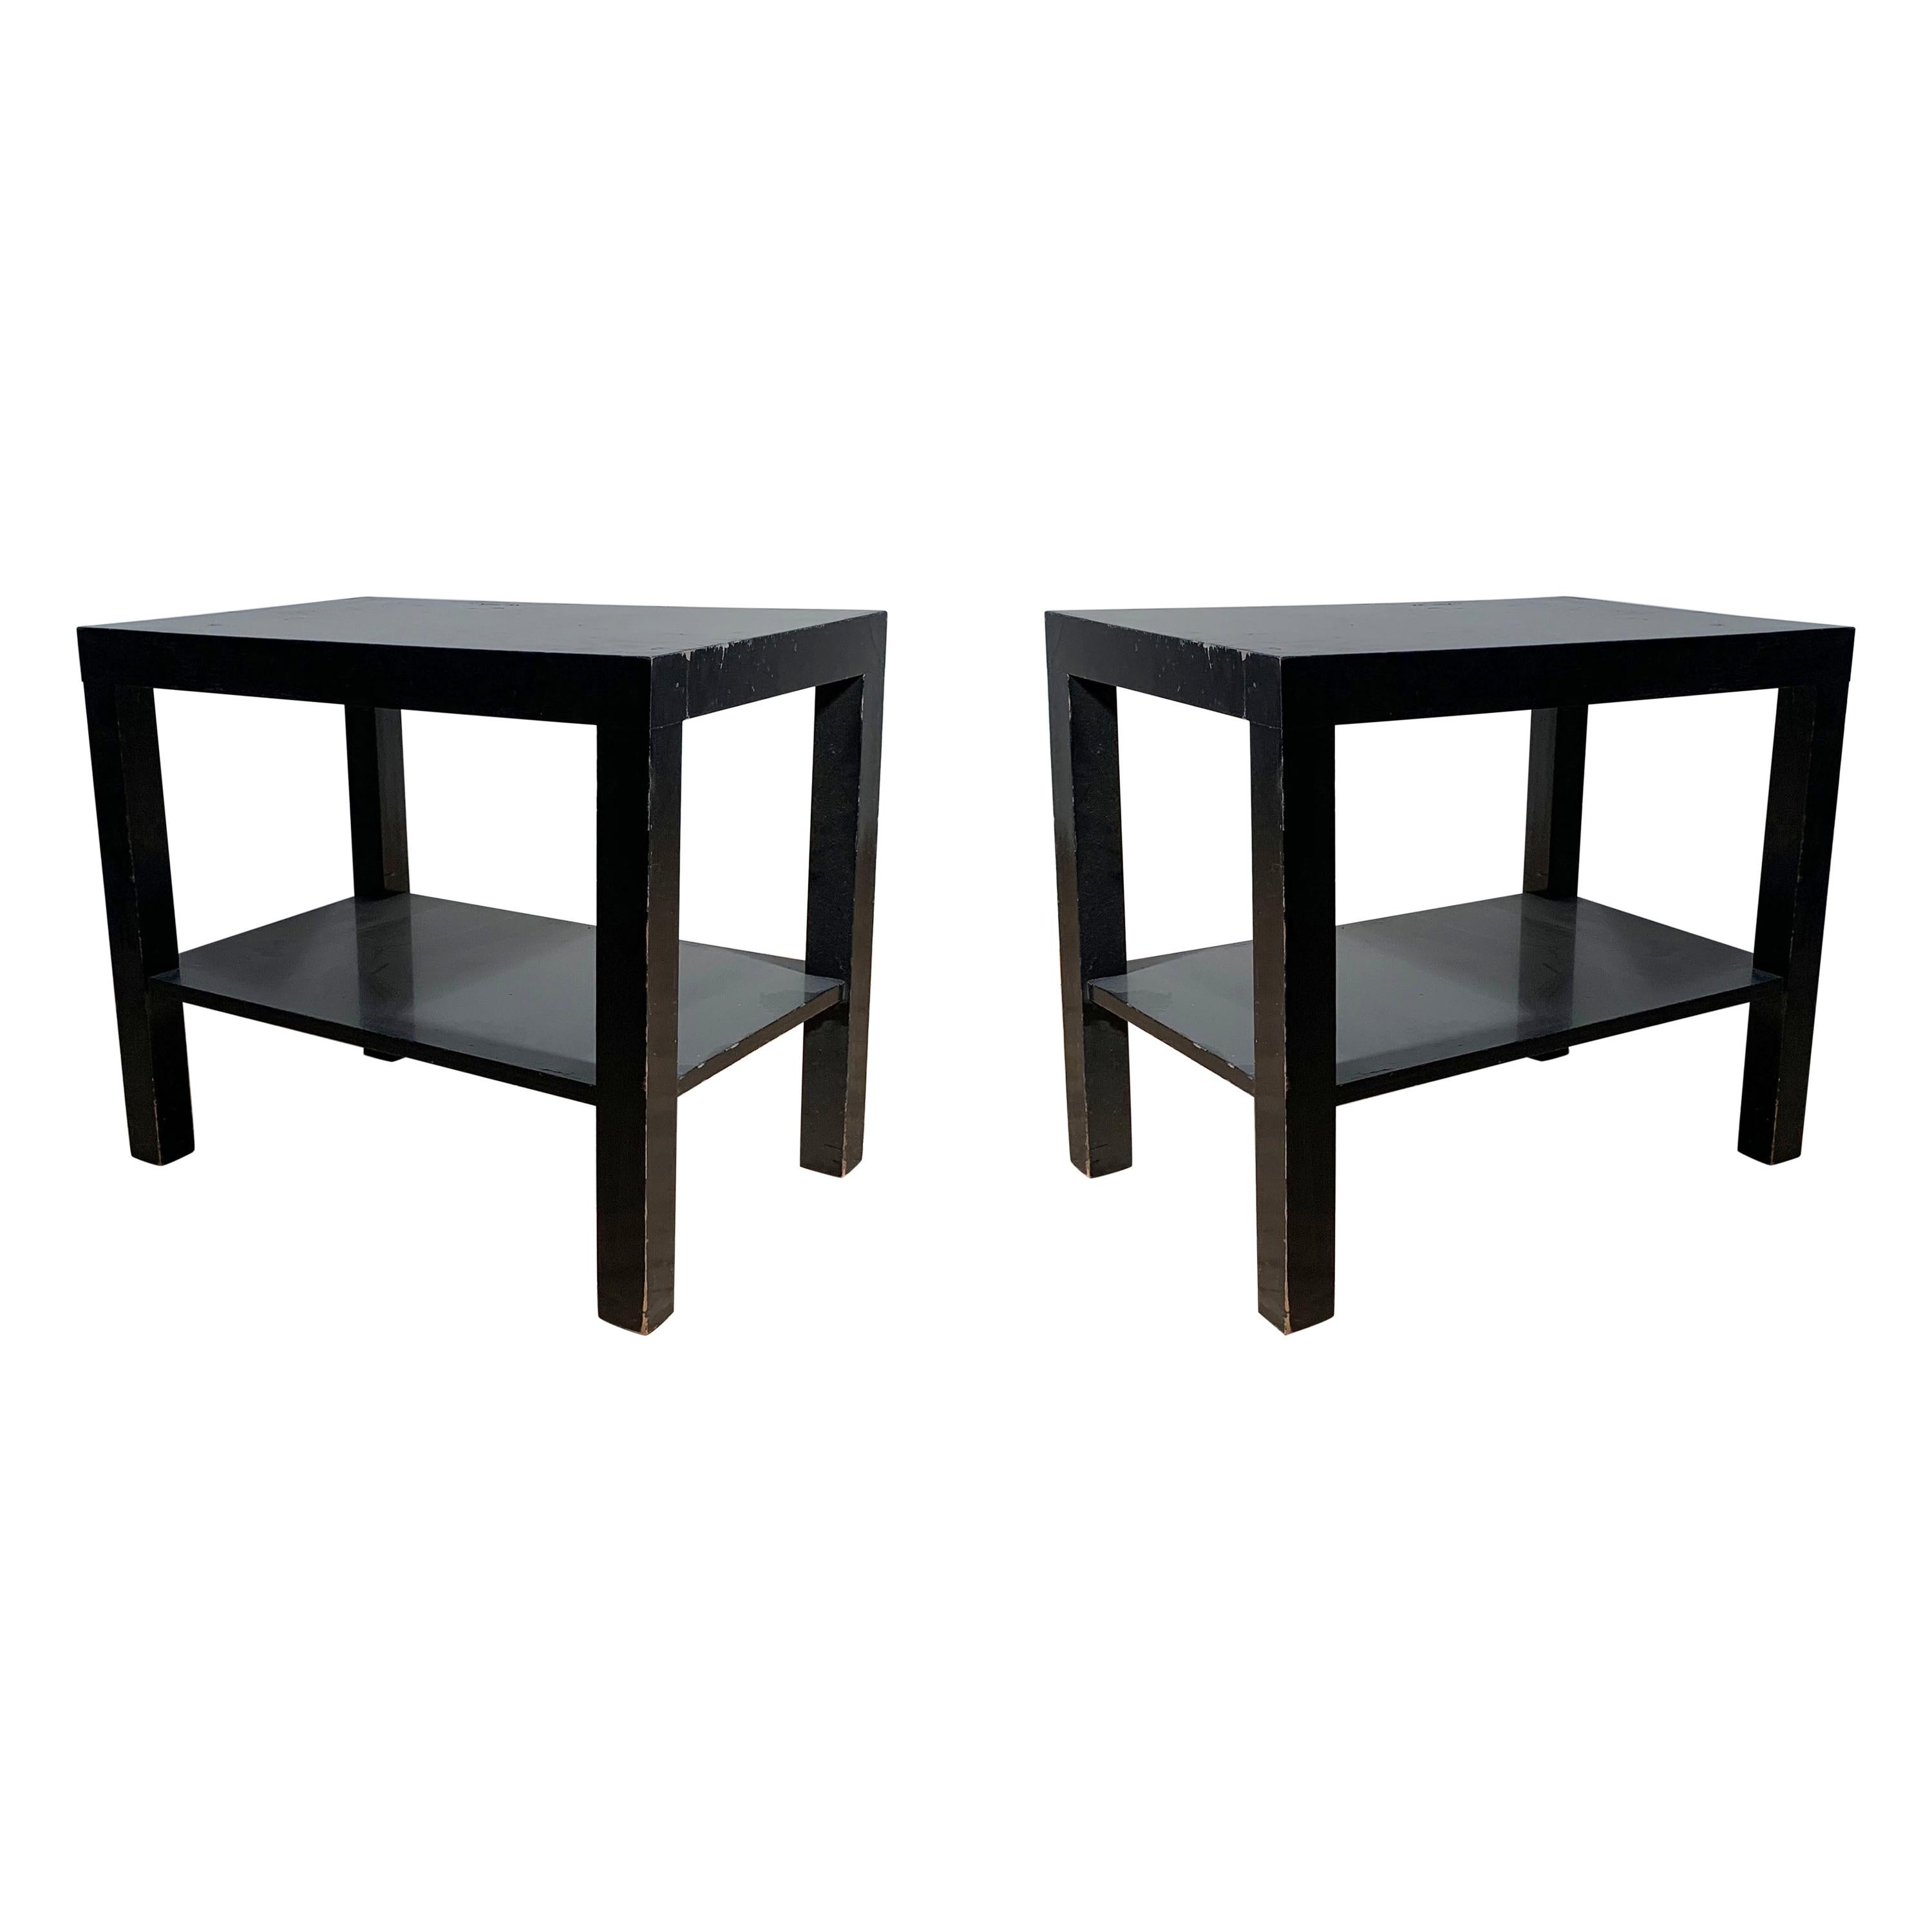 Pair of Modern Parsons Endtables / Night stands attributed to Robsjohn Gibbings